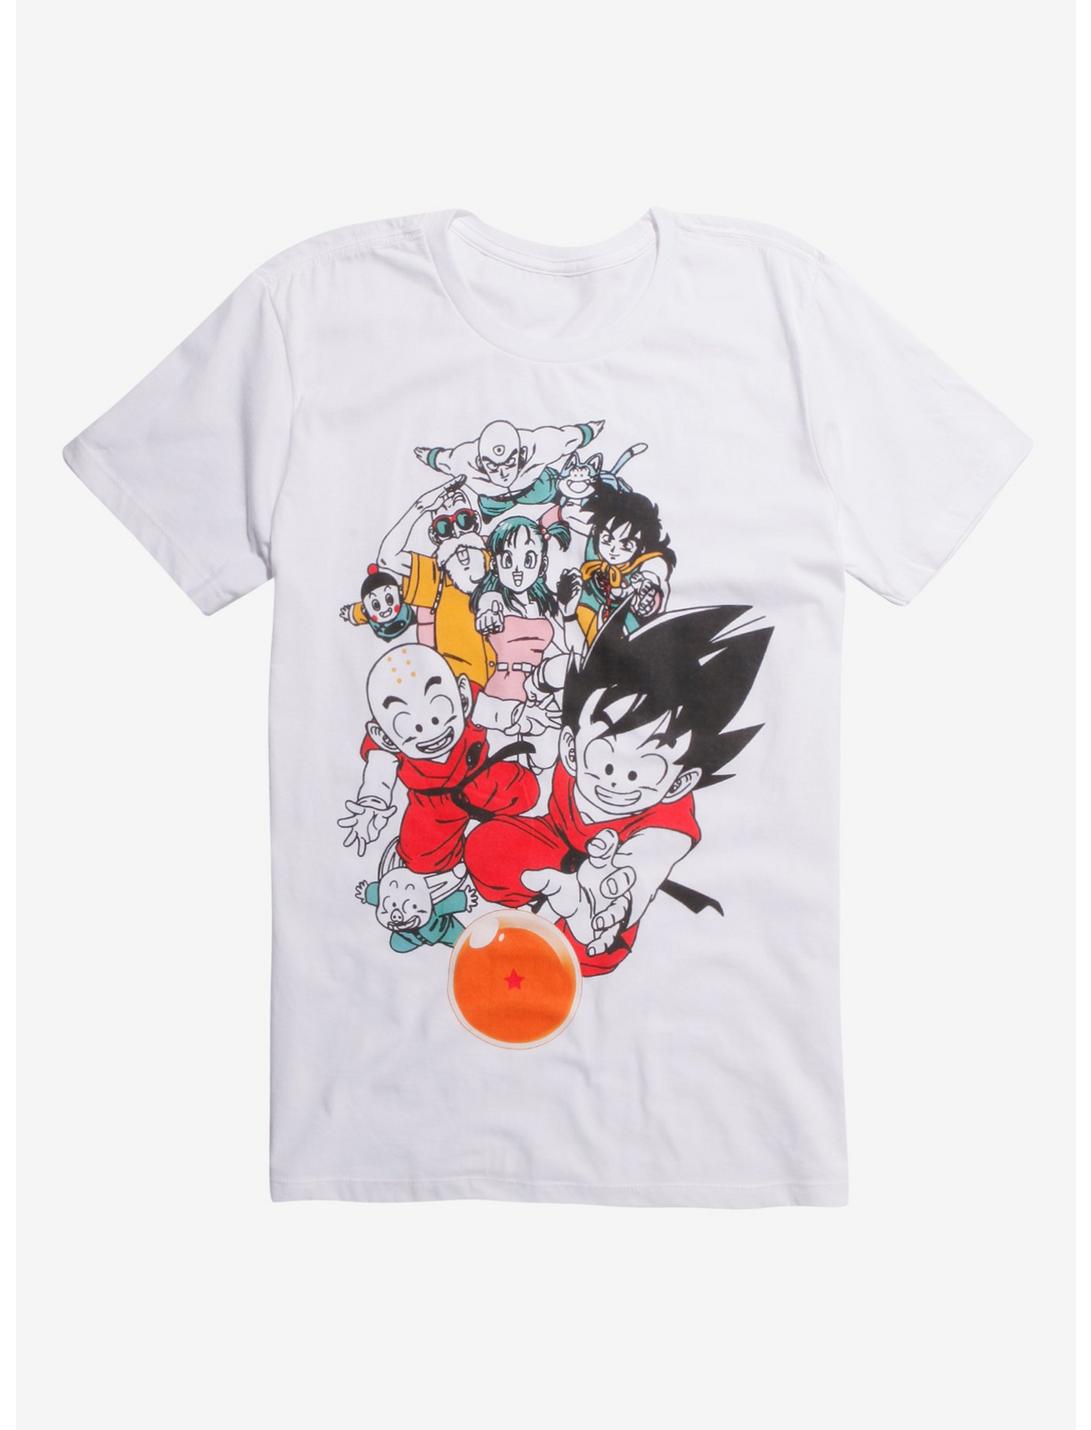 Dragon Ball Z Classic Group T-Shirt Hot Topic Exclusive, WHITE, hi-res